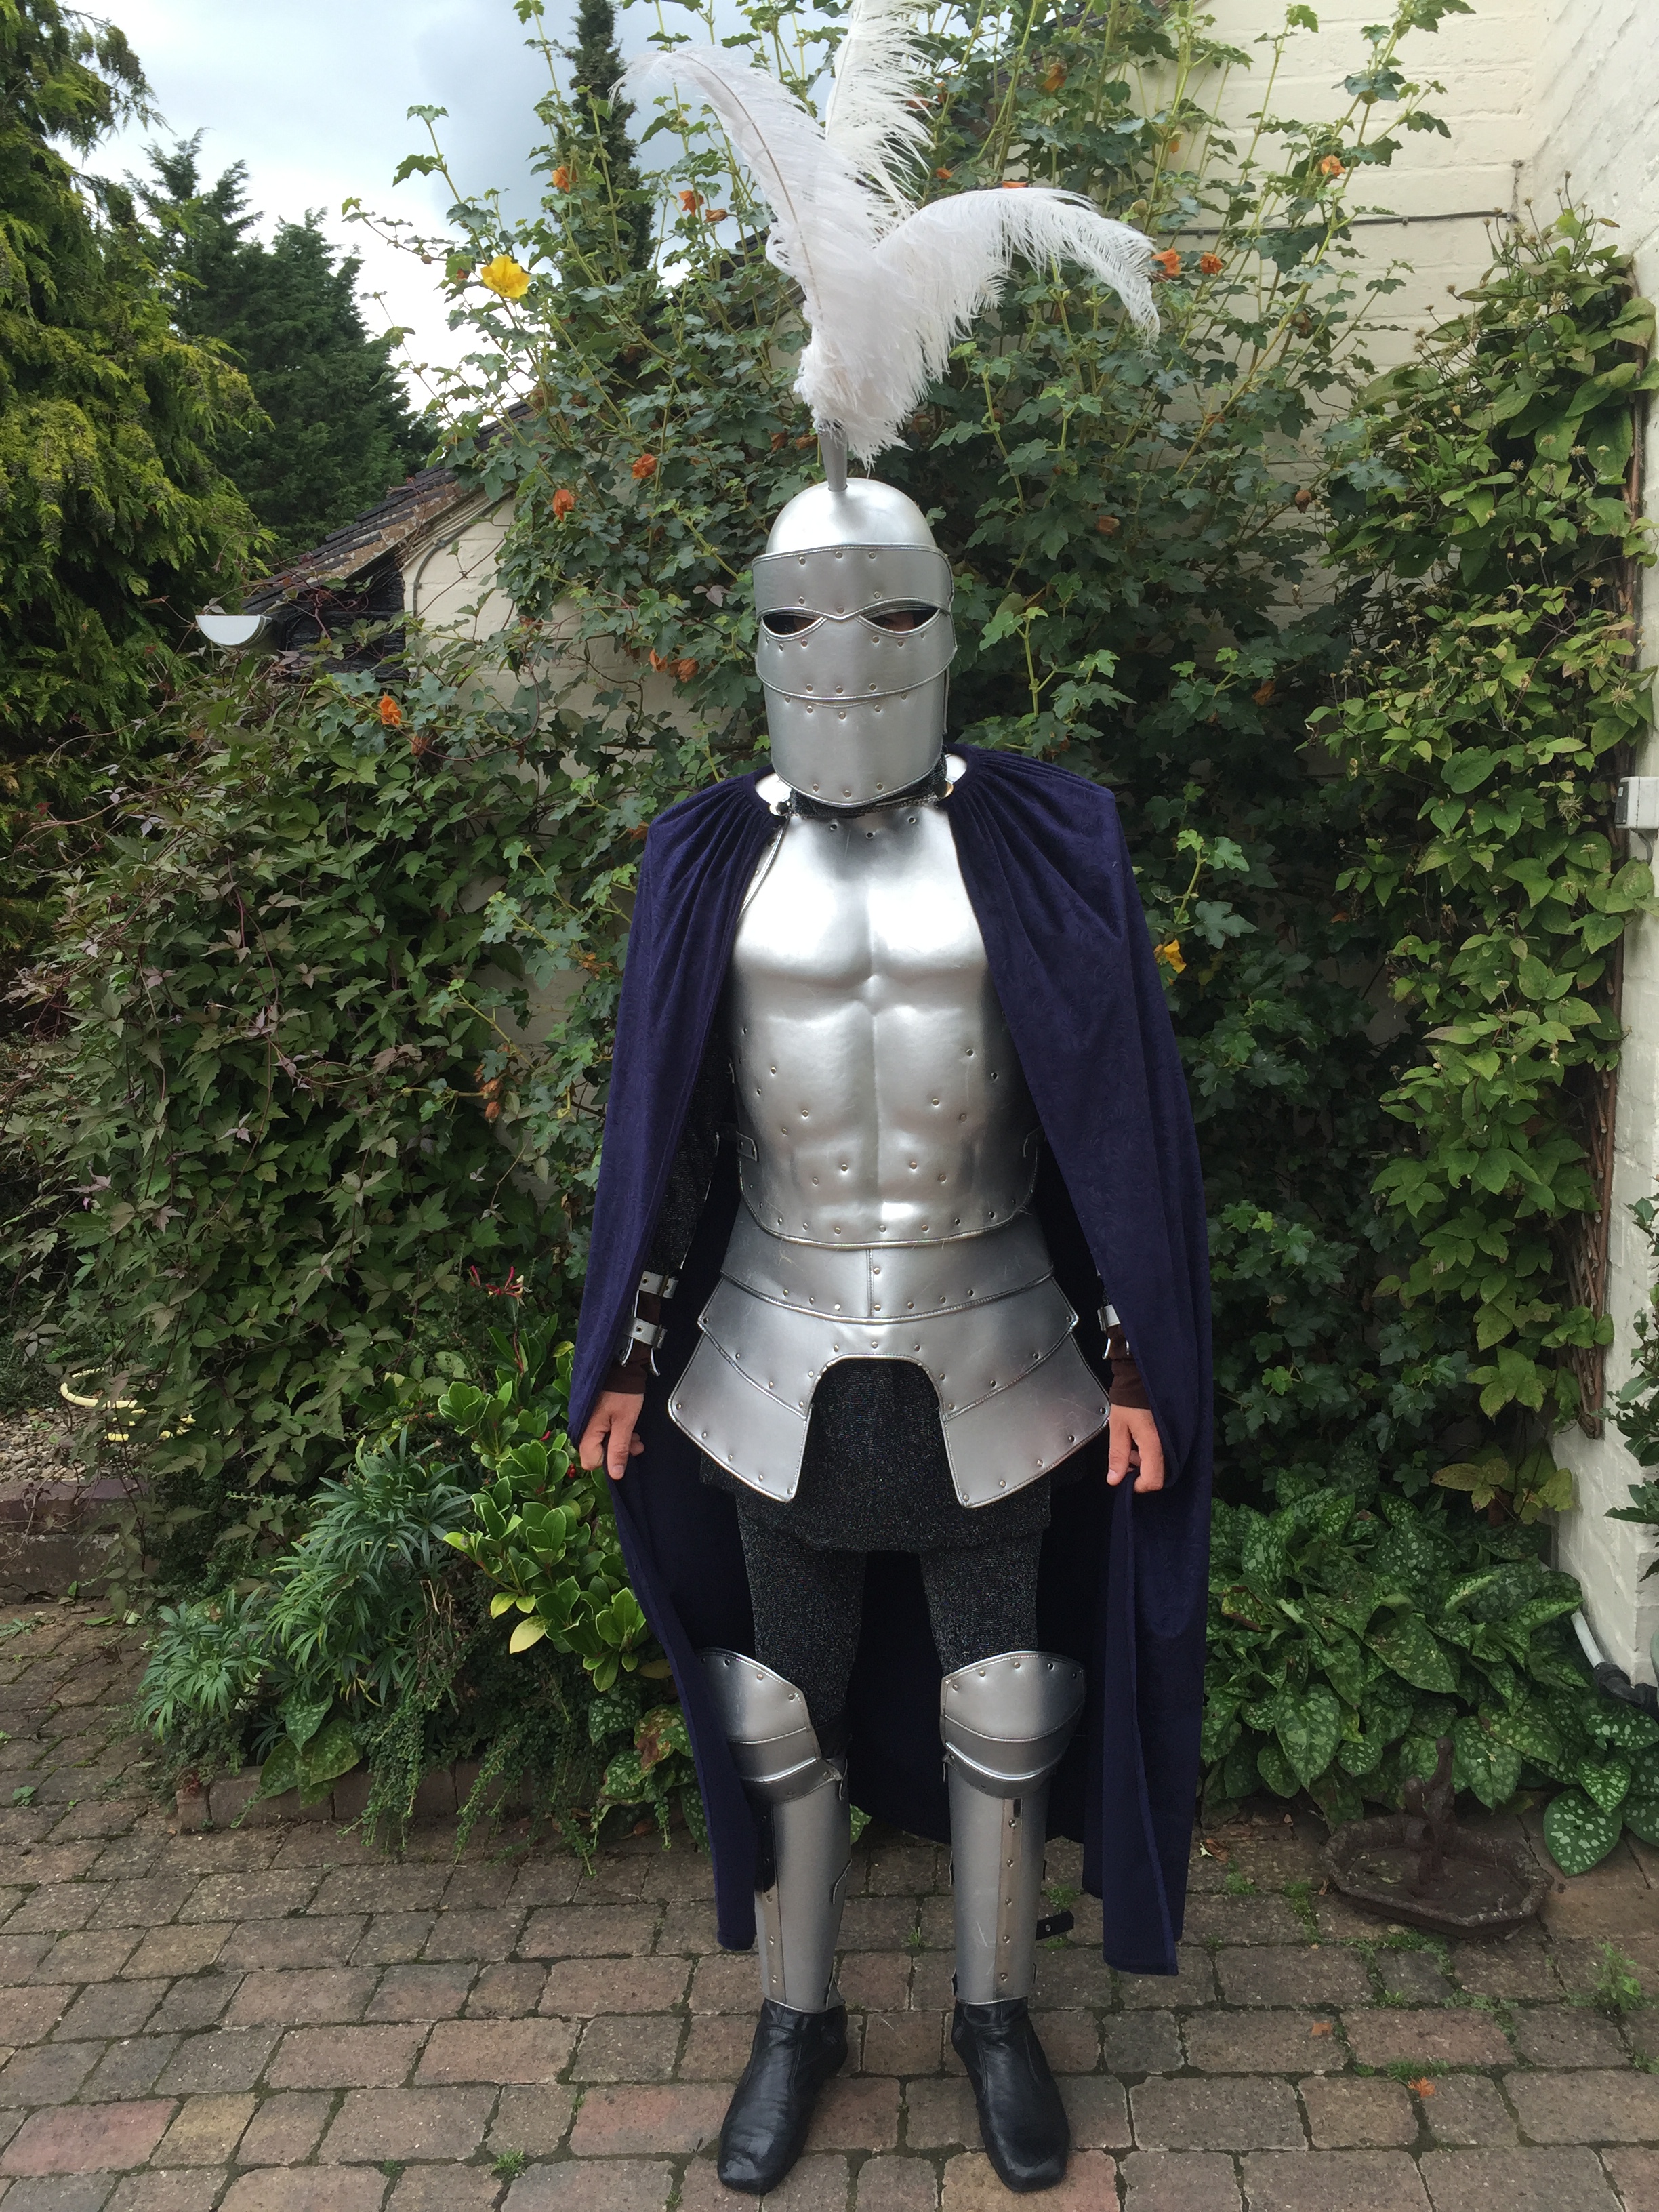 medieval knight costume